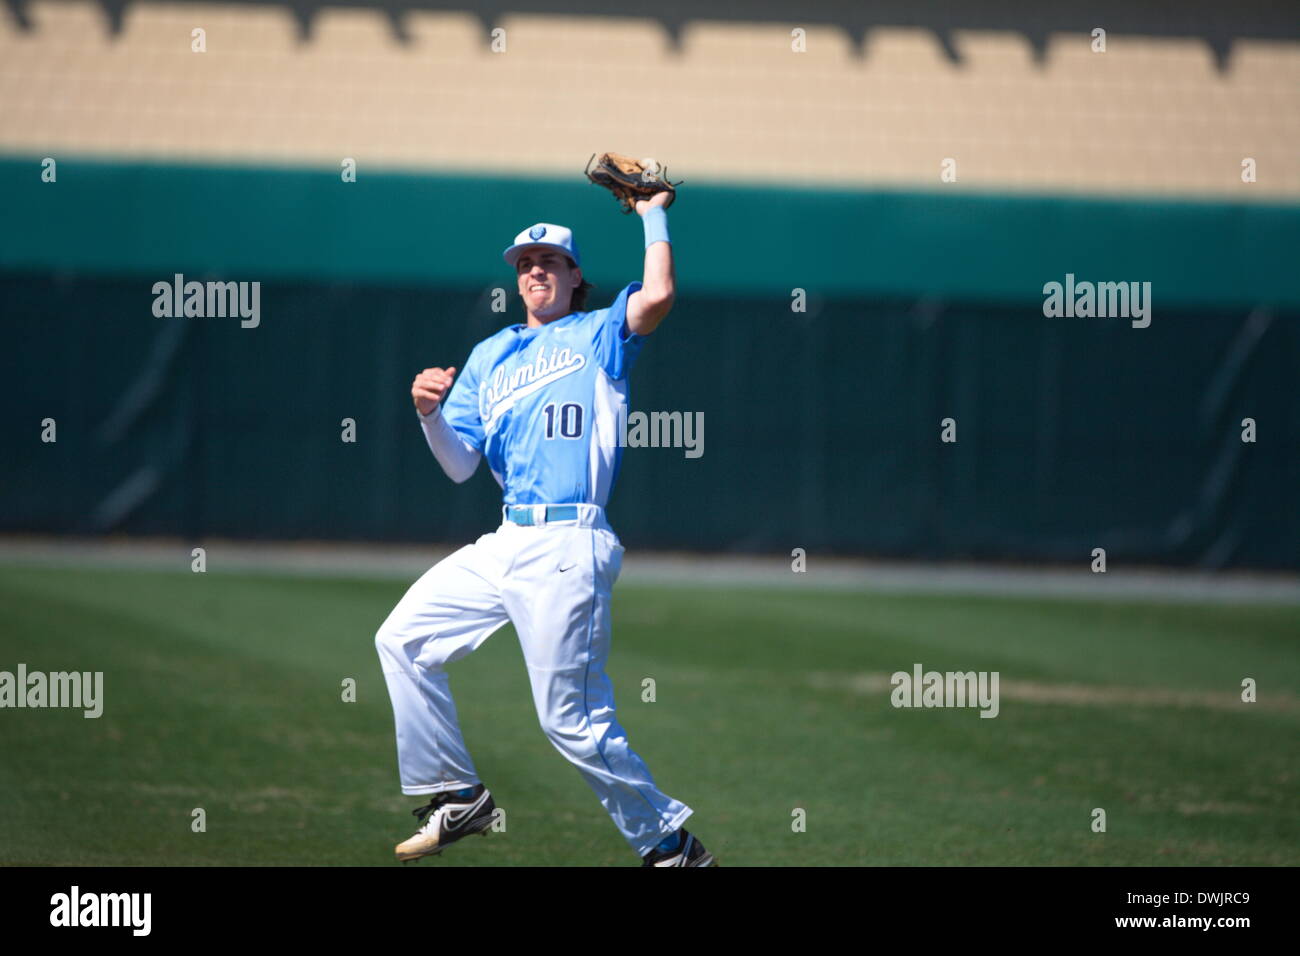 Kennesaw, Georgia, USA.  March 8, 2014 -- Columbia shortstop Aaron Silbar (10) makes a catch during the first game of Saturday's doubleheader between Columbia University and Kennesaw State University. The teams split the doubleheader. Credit:  Wayne Hughes | Alamy Live News Stock Photo